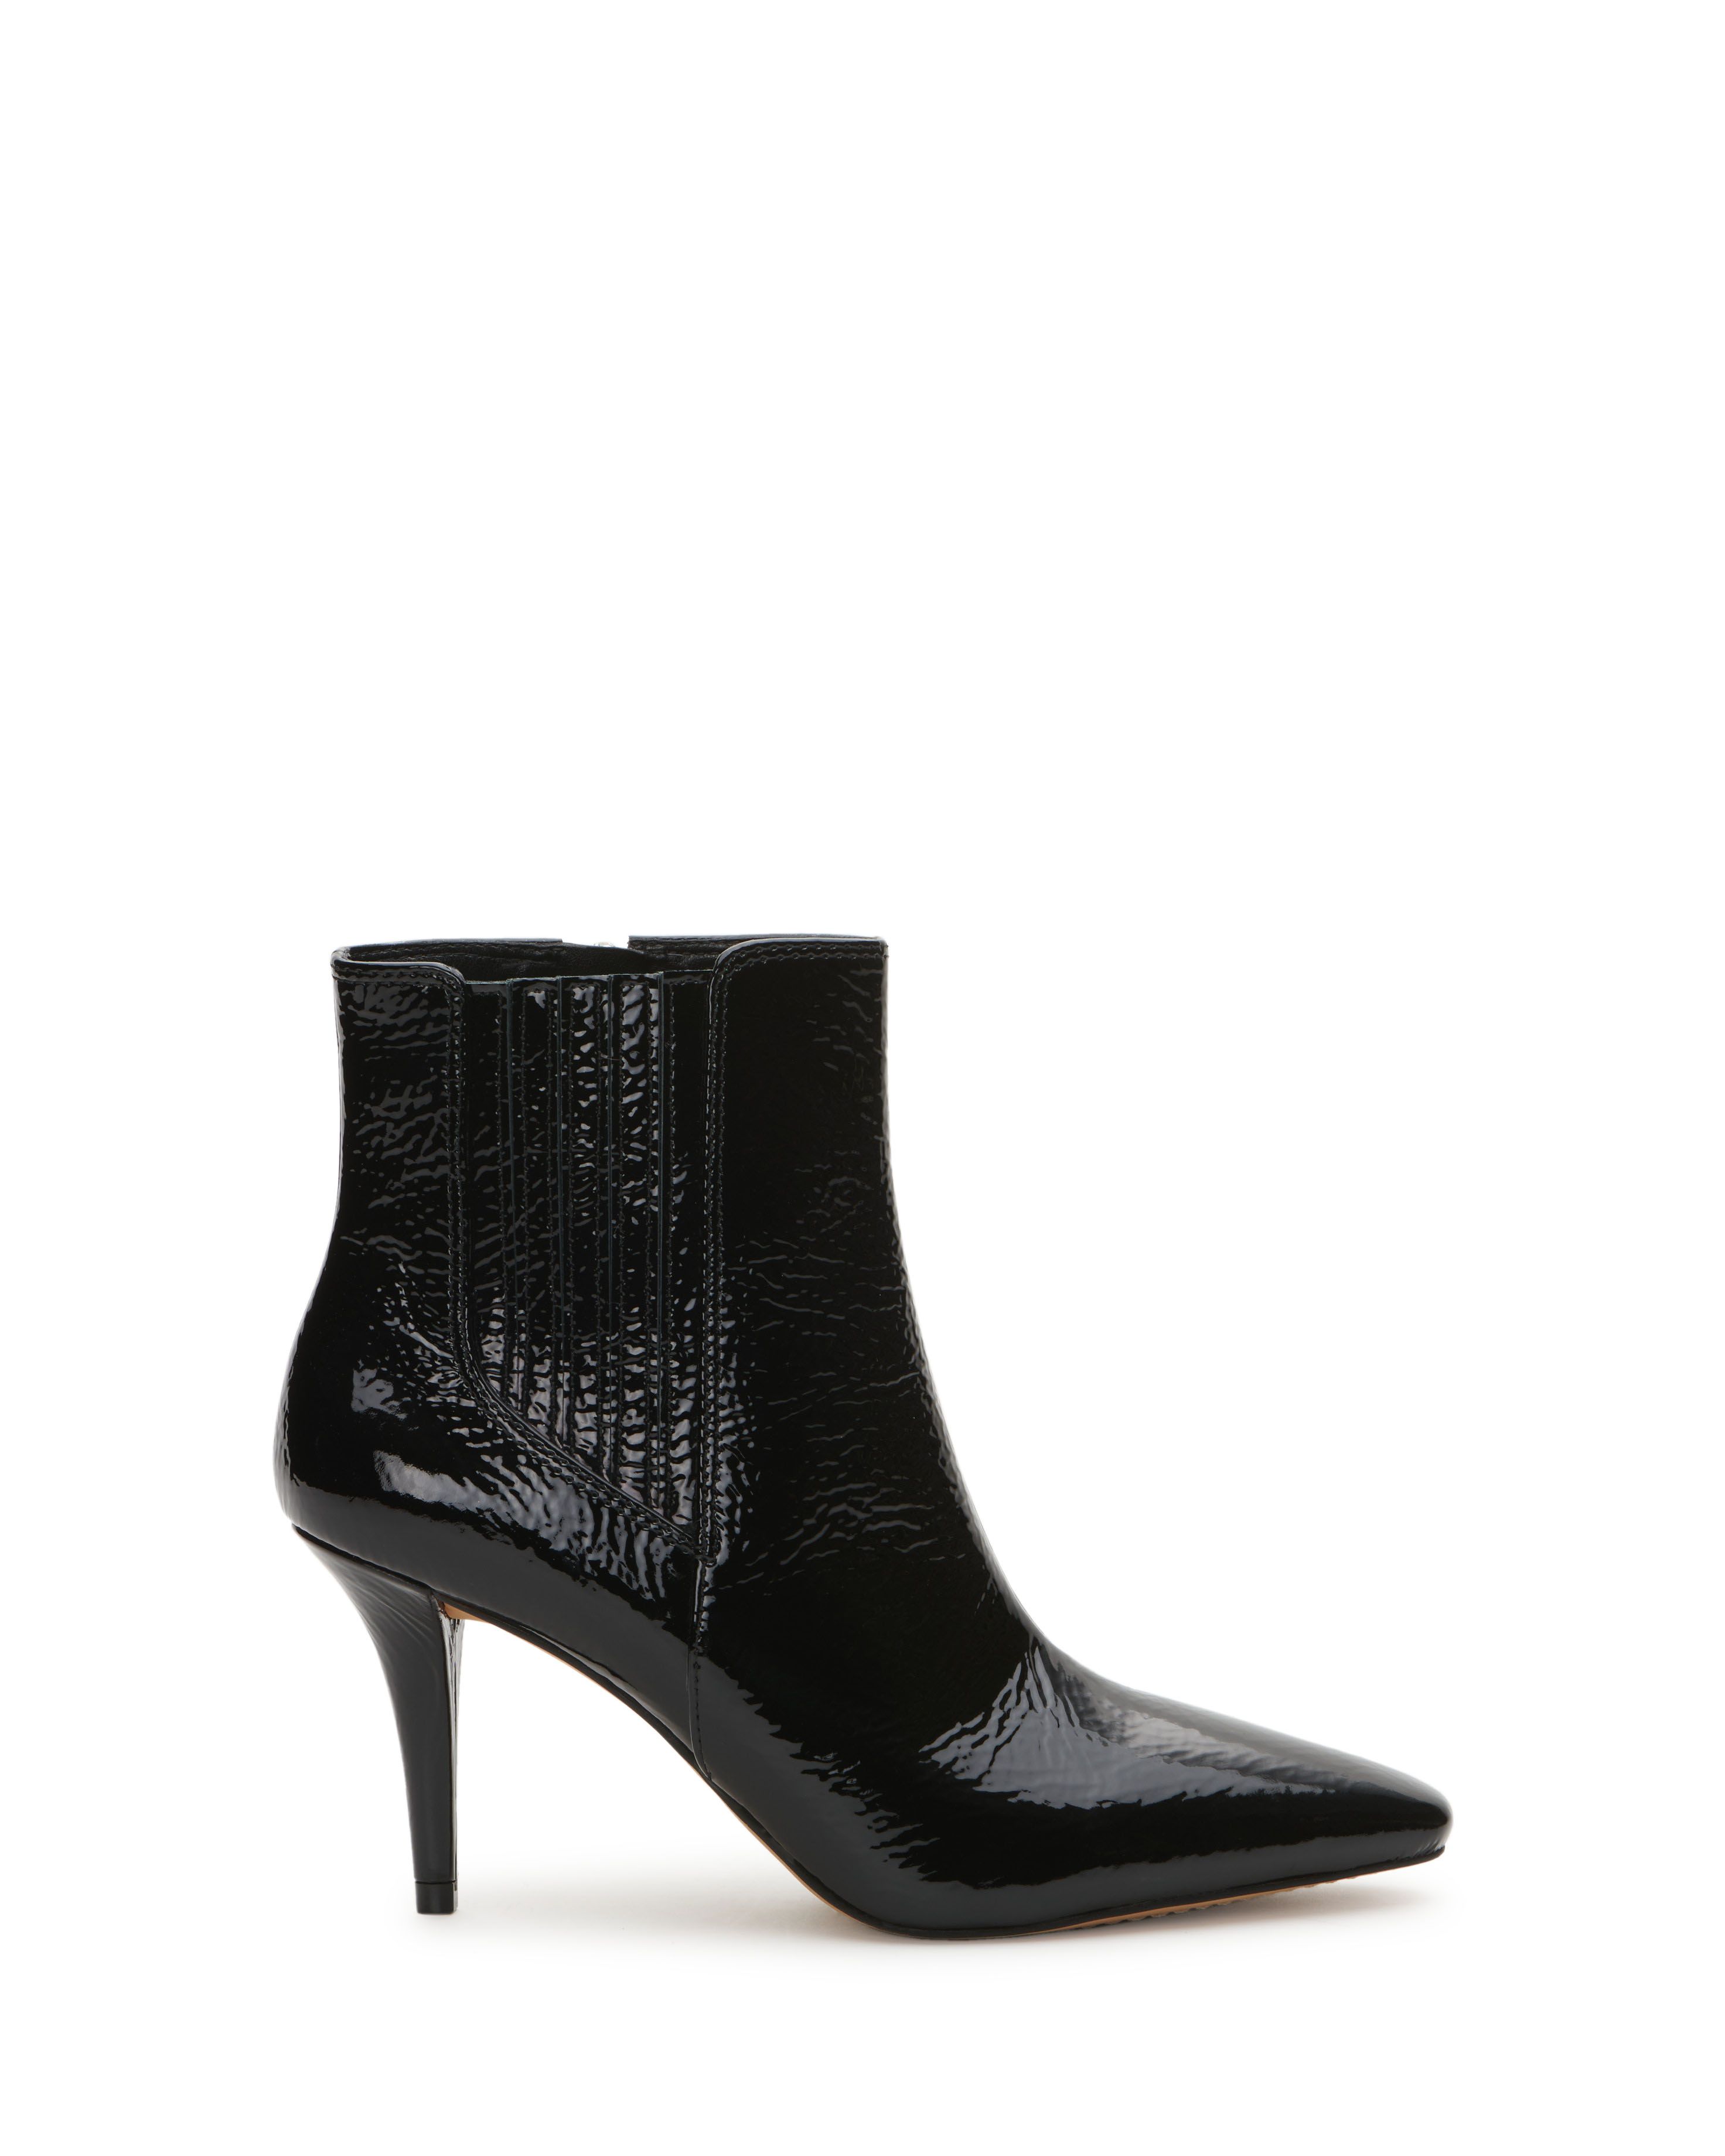 Vince Camuto Ambind Bootie | Vince Camuto